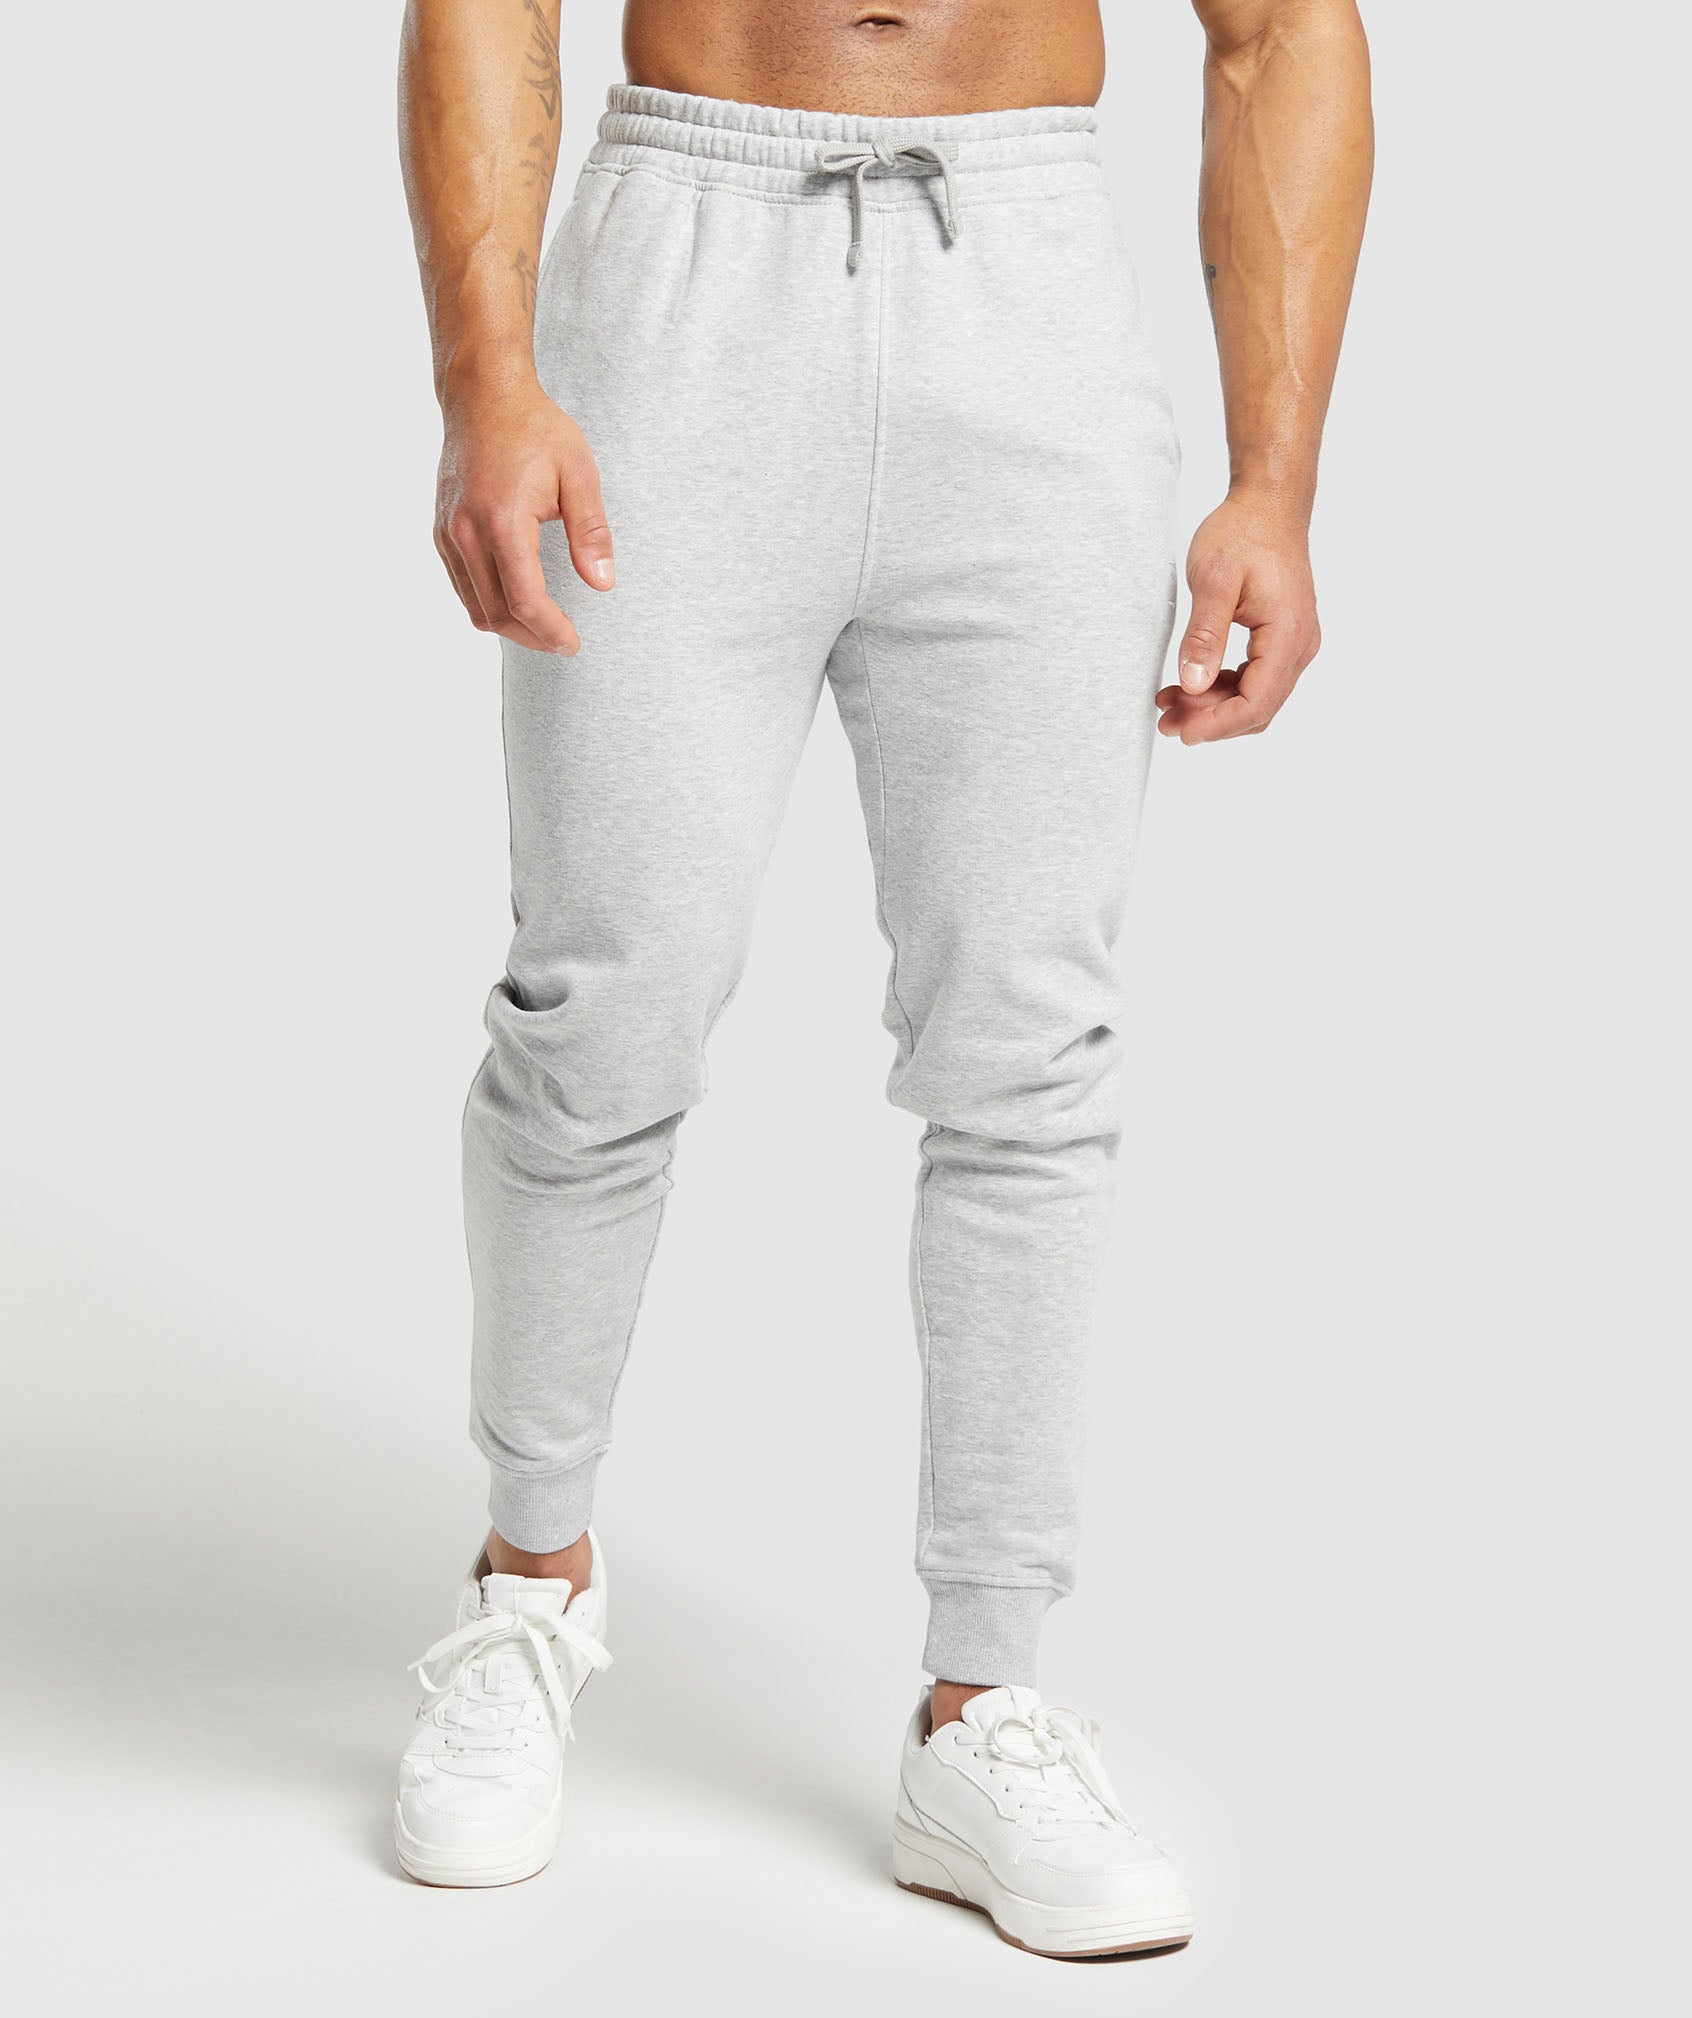 Crest Joggers in Light Grey Marl